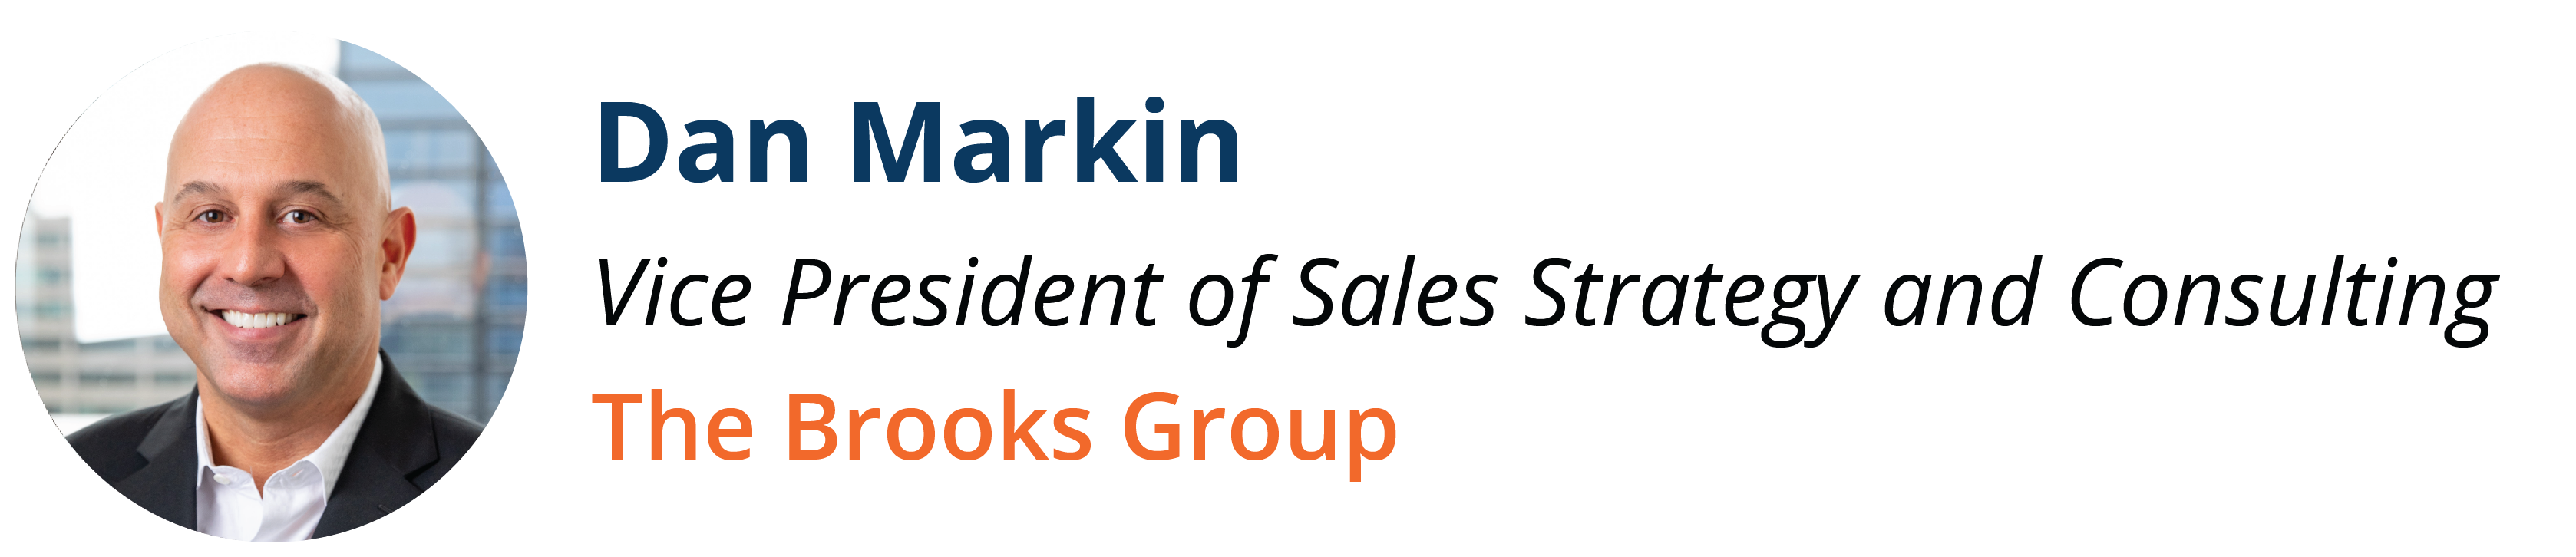 Dan Markin Vice President of Sales Strategy and Consulting